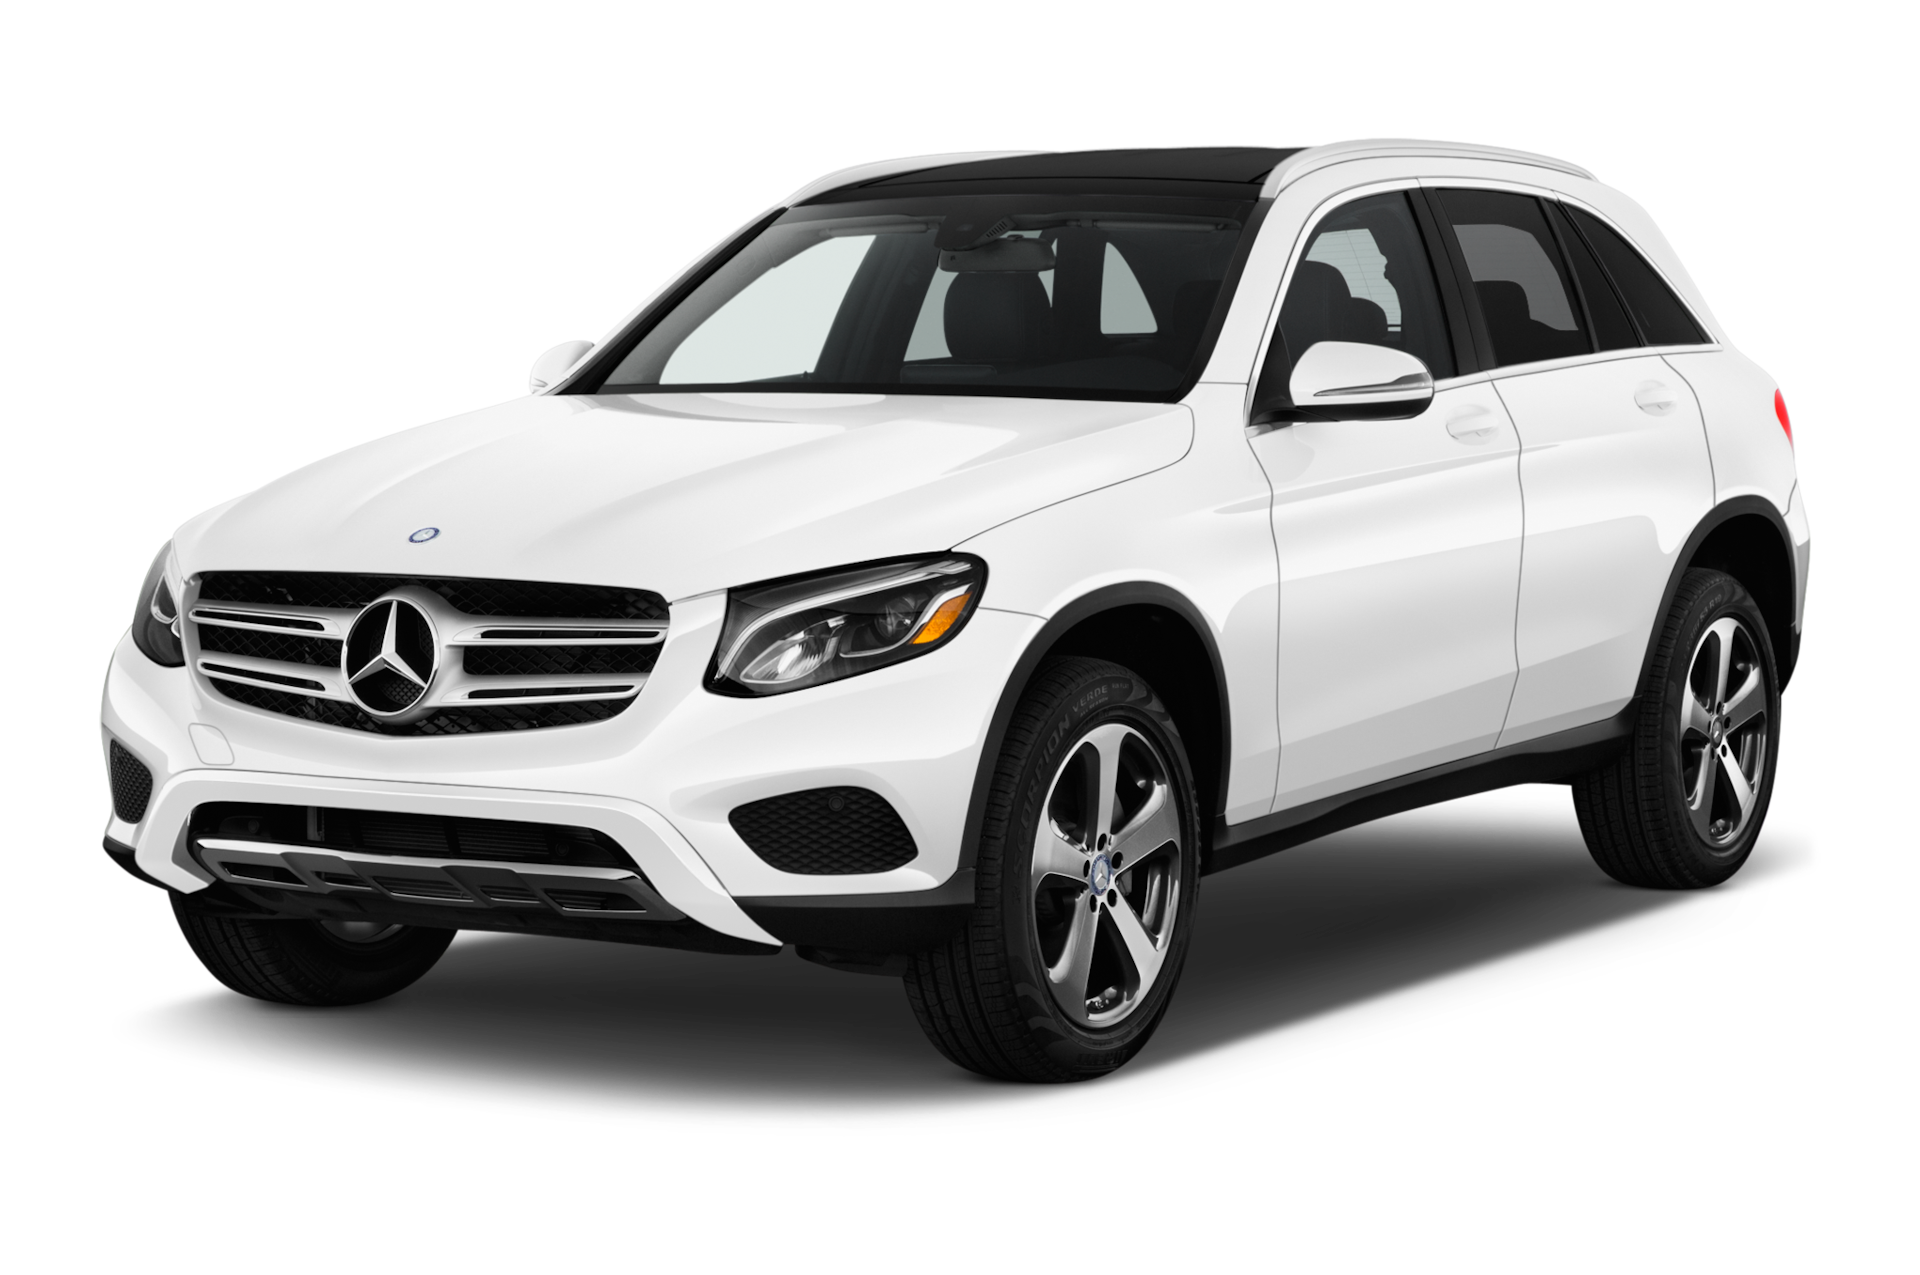 2019 Mercedes-Benz GLC-Class Prices, Reviews, and Photos - MotorTrend